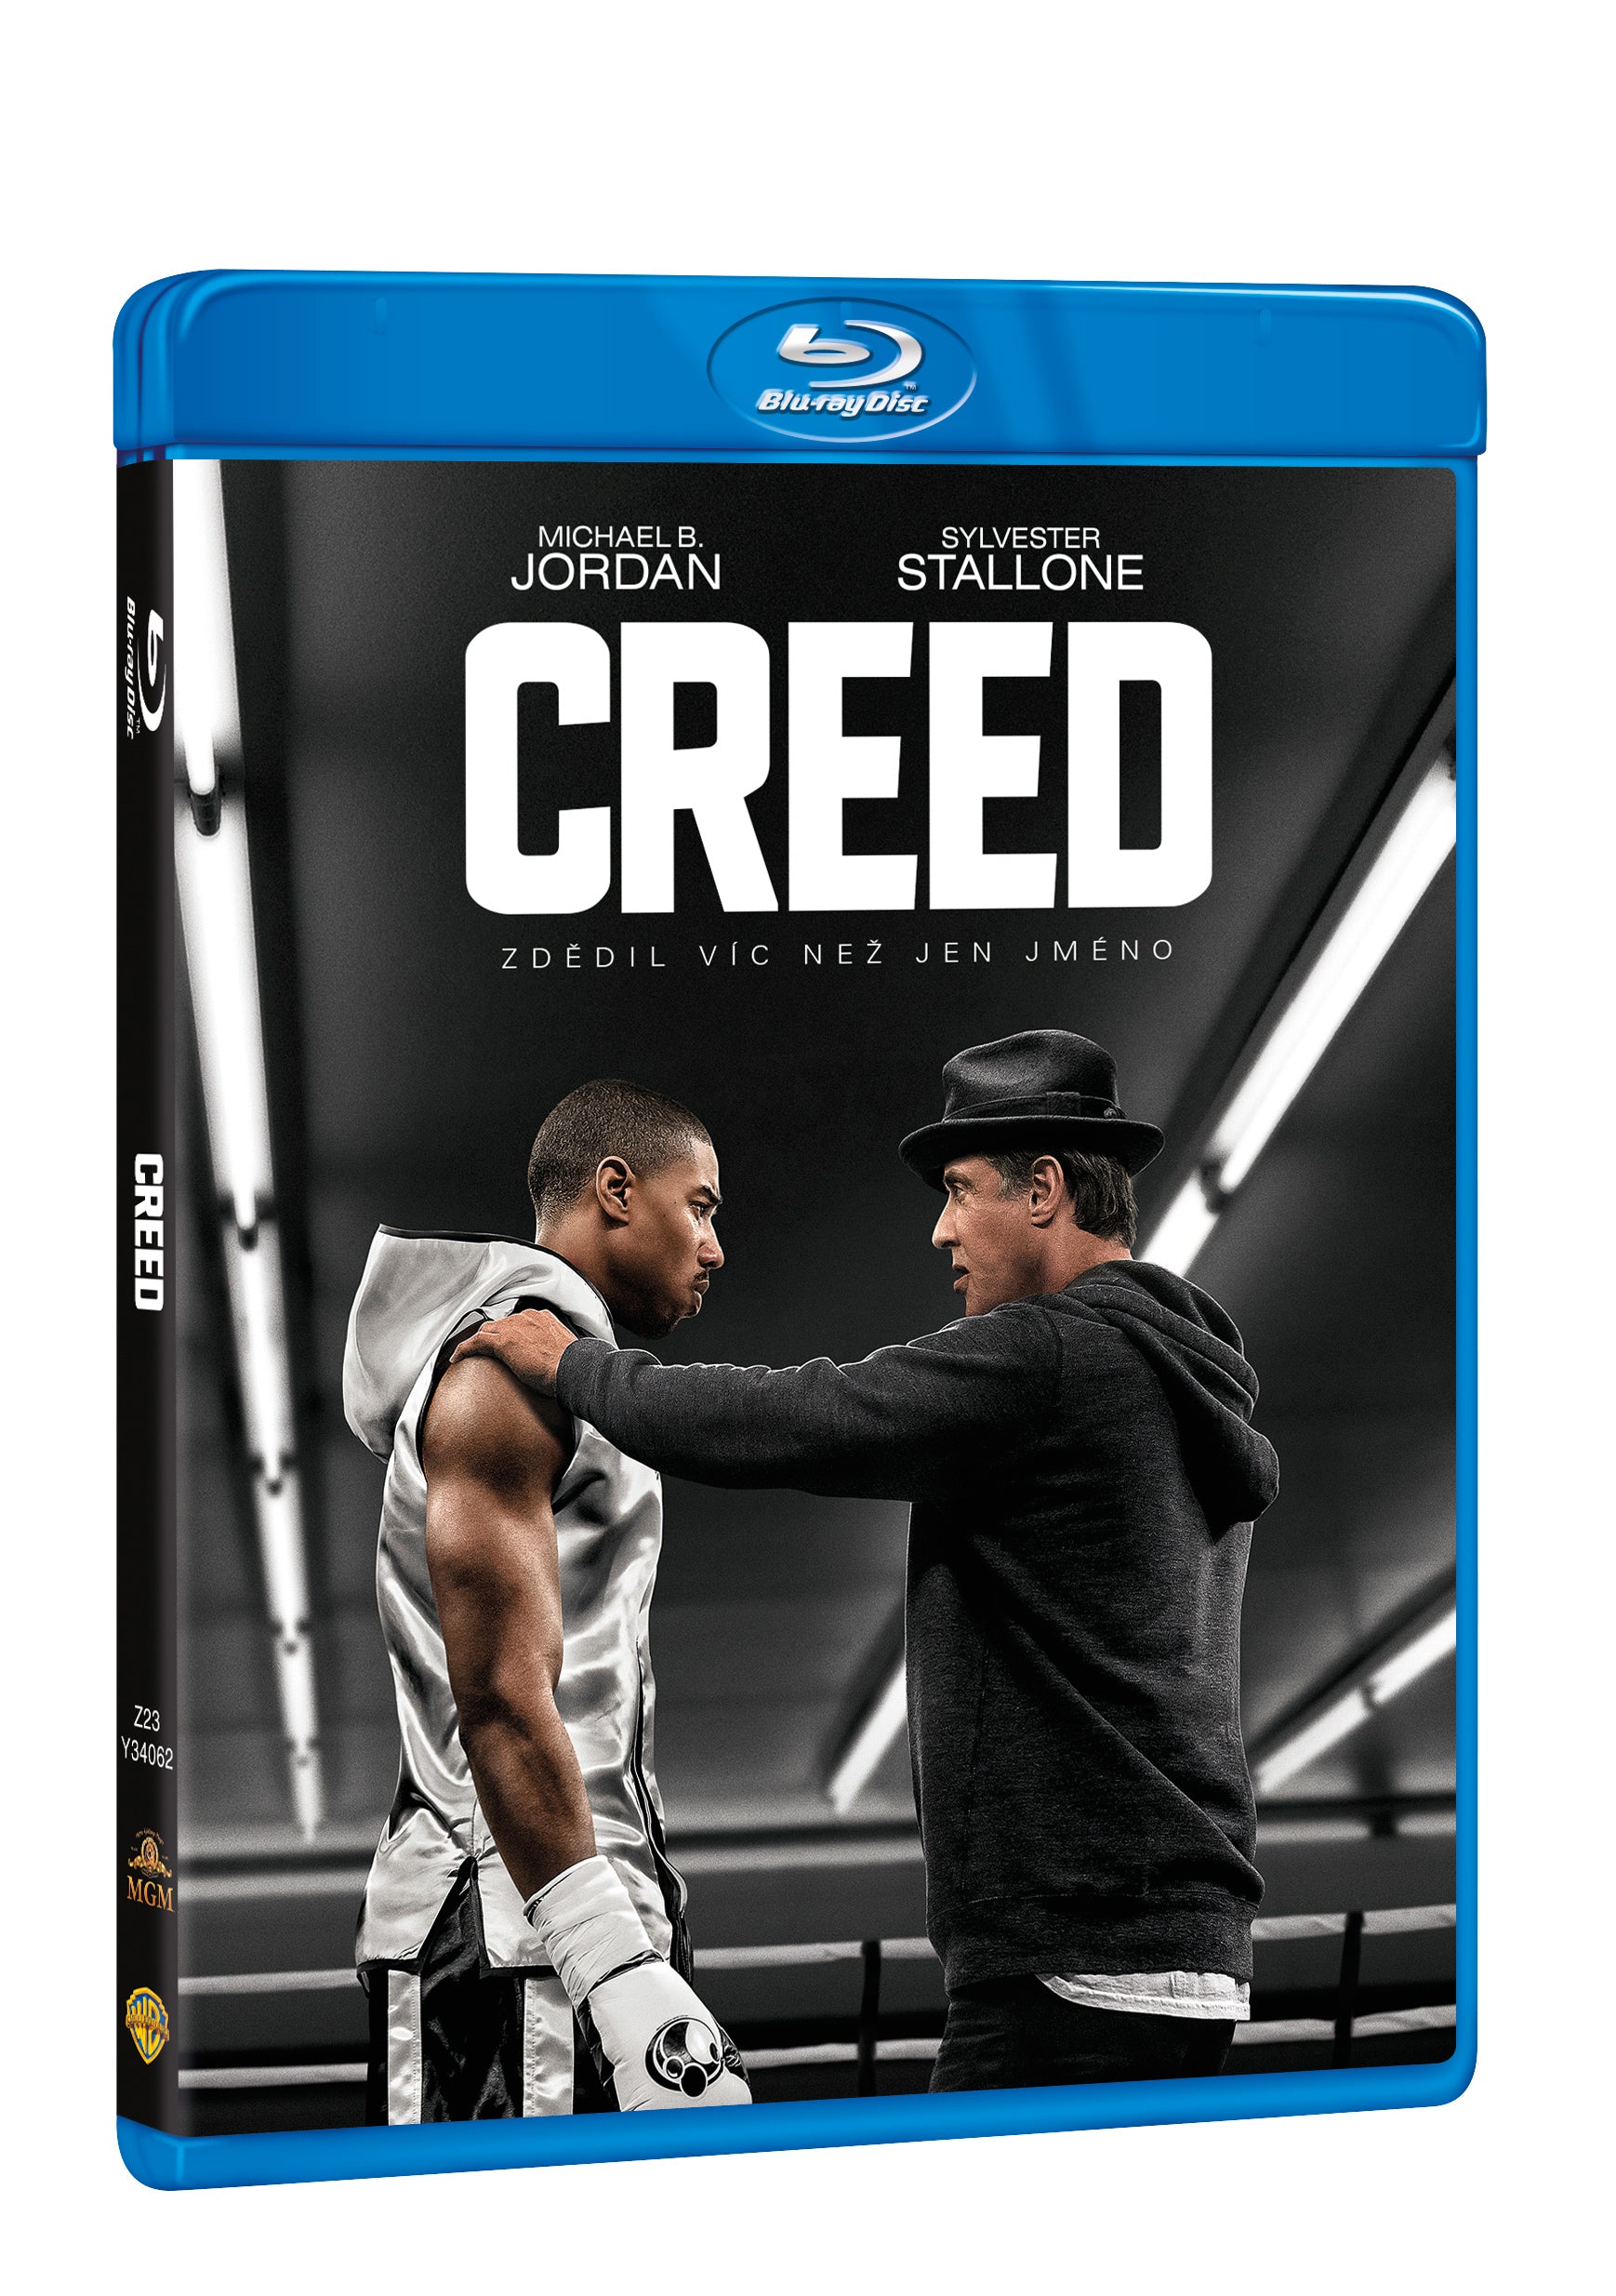 Creed BD / Creed - Czech version